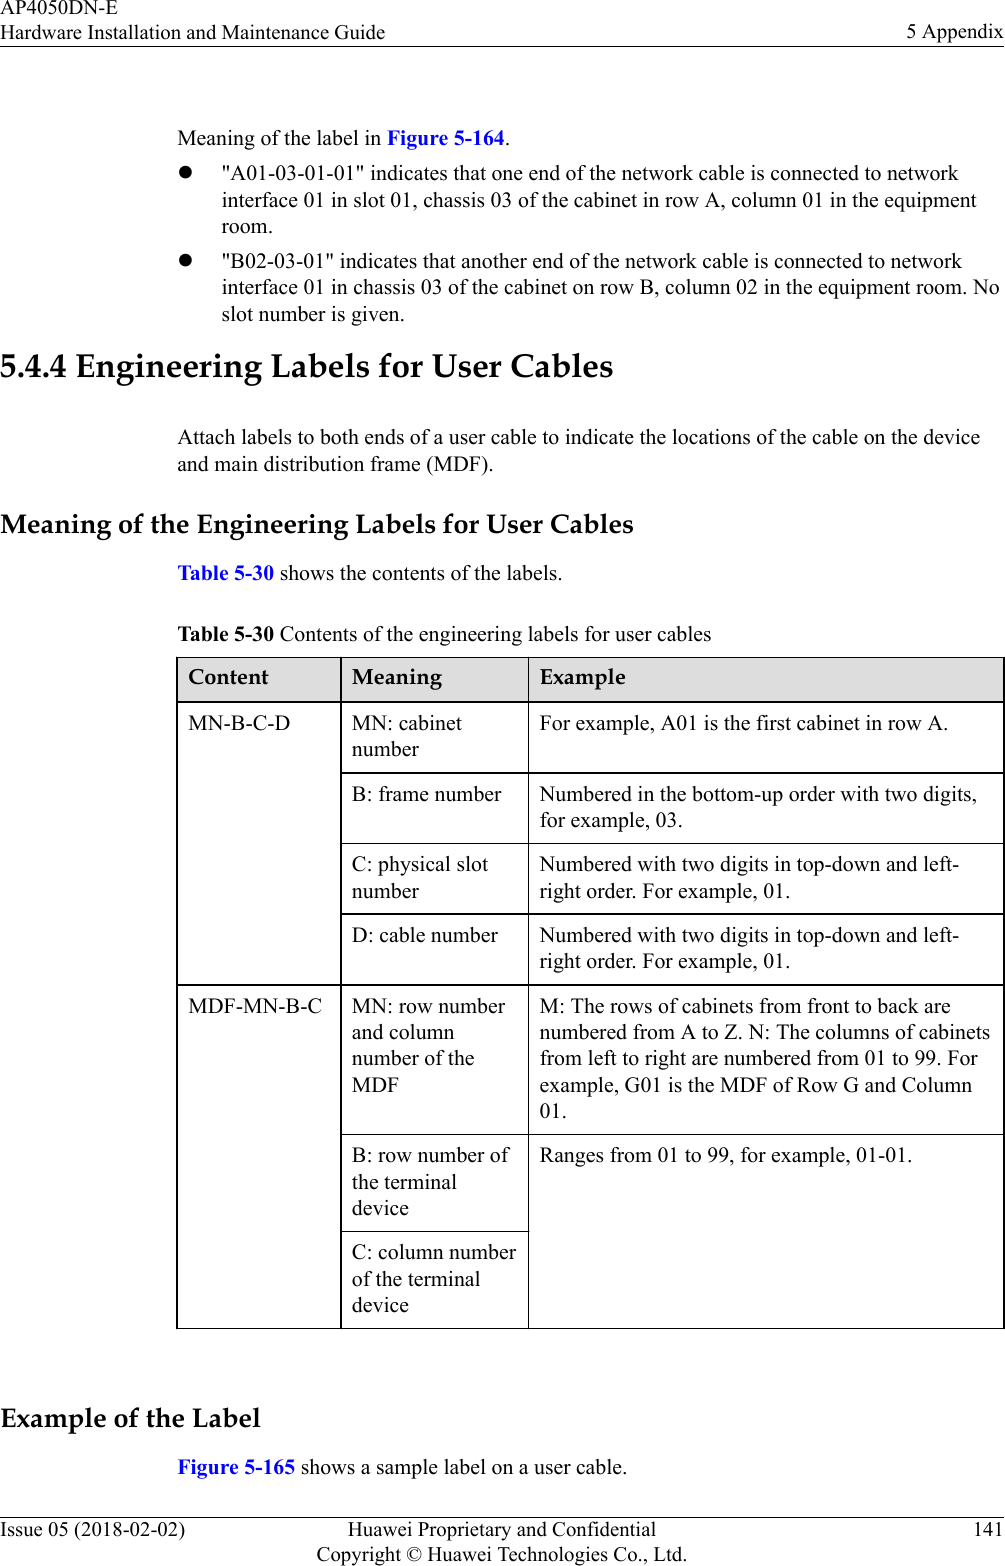  Meaning of the label in Figure 5-164.l&quot;A01-03-01-01&quot; indicates that one end of the network cable is connected to networkinterface 01 in slot 01, chassis 03 of the cabinet in row A, column 01 in the equipmentroom.l&quot;B02-03-01&quot; indicates that another end of the network cable is connected to networkinterface 01 in chassis 03 of the cabinet on row B, column 02 in the equipment room. Noslot number is given.5.4.4 Engineering Labels for User CablesAttach labels to both ends of a user cable to indicate the locations of the cable on the deviceand main distribution frame (MDF).Meaning of the Engineering Labels for User CablesTable 5-30 shows the contents of the labels.Table 5-30 Contents of the engineering labels for user cablesContent Meaning ExampleMN-B-C-D MN: cabinetnumberFor example, A01 is the first cabinet in row A.B: frame number Numbered in the bottom-up order with two digits,for example, 03.C: physical slotnumberNumbered with two digits in top-down and left-right order. For example, 01.D: cable number Numbered with two digits in top-down and left-right order. For example, 01.MDF-MN-B-C MN: row numberand columnnumber of theMDFM: The rows of cabinets from front to back arenumbered from A to Z. N: The columns of cabinetsfrom left to right are numbered from 01 to 99. Forexample, G01 is the MDF of Row G and Column01.B: row number ofthe terminaldeviceRanges from 01 to 99, for example, 01-01.C: column numberof the terminaldevice Example of the LabelFigure 5-165 shows a sample label on a user cable.AP4050DN-EHardware Installation and Maintenance Guide 5 AppendixIssue 05 (2018-02-02) Huawei Proprietary and ConfidentialCopyright © Huawei Technologies Co., Ltd.141